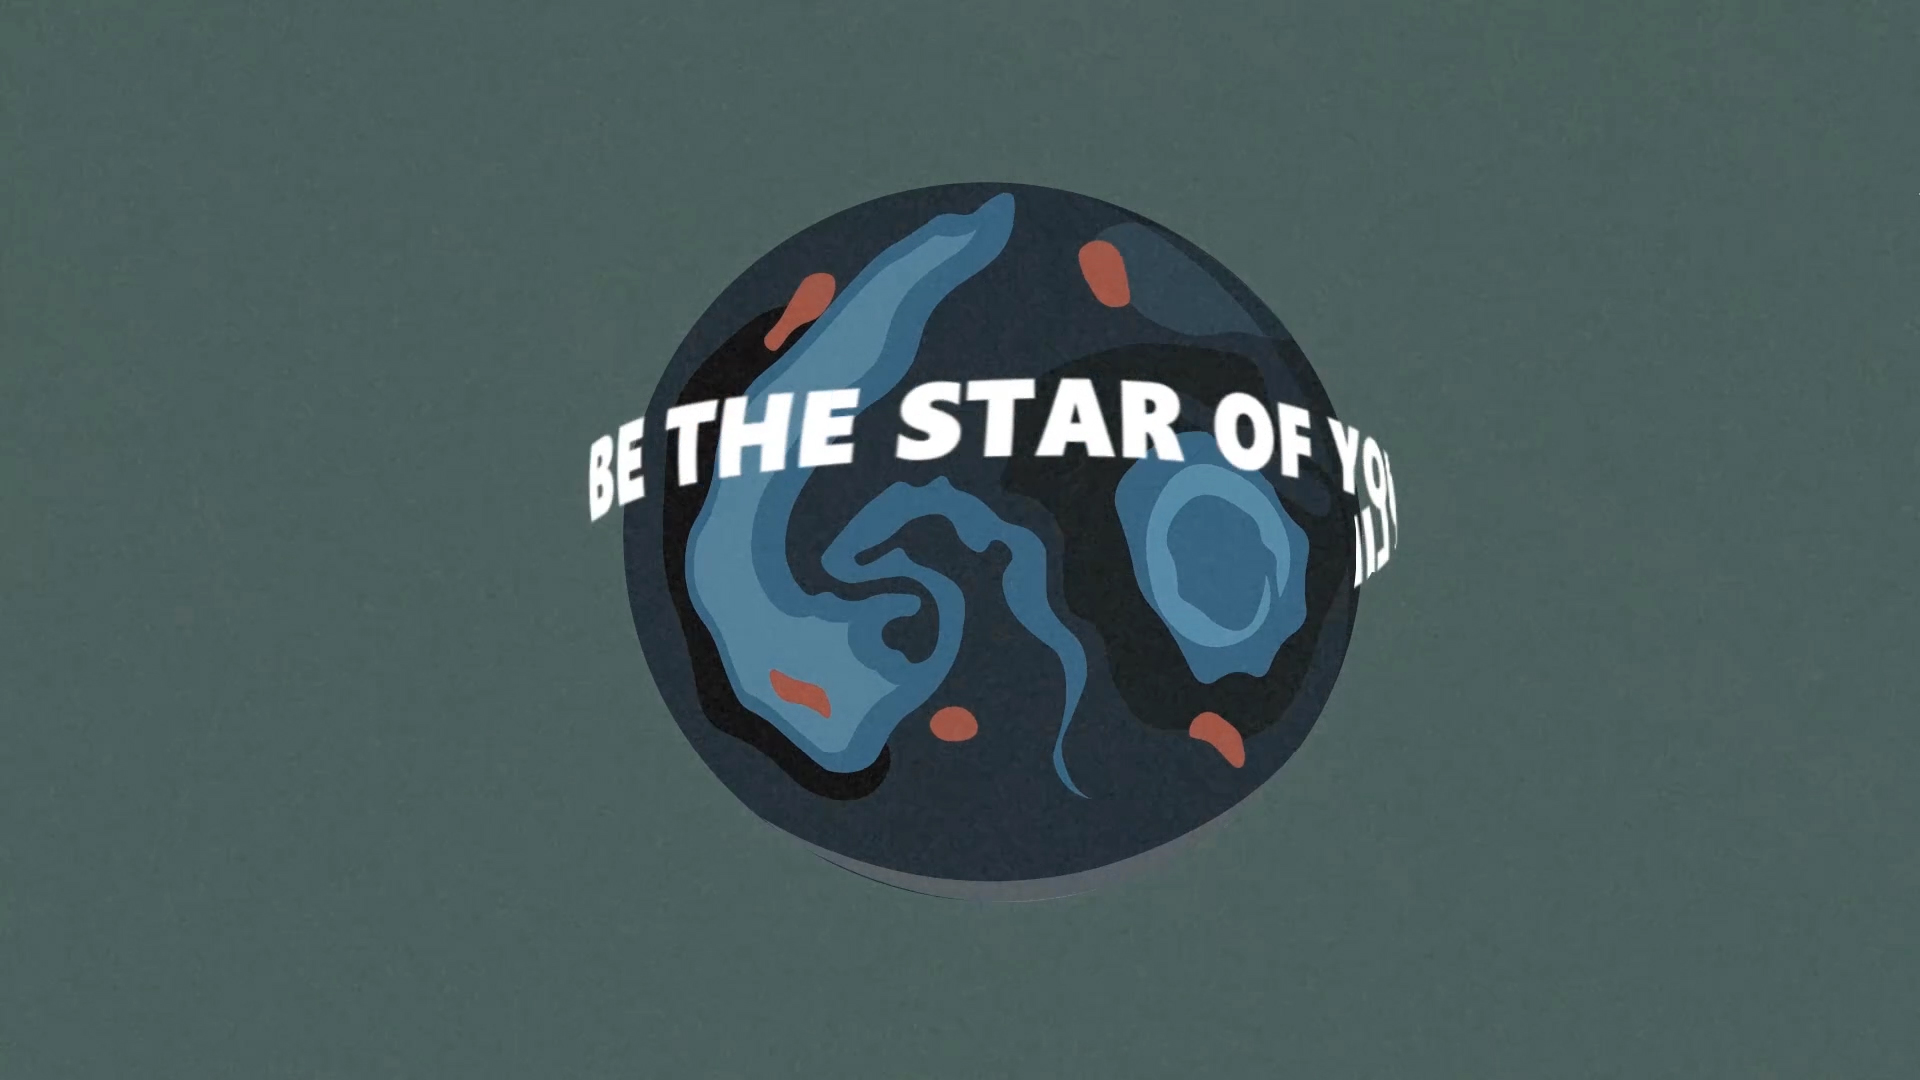 "Be the star of your life"